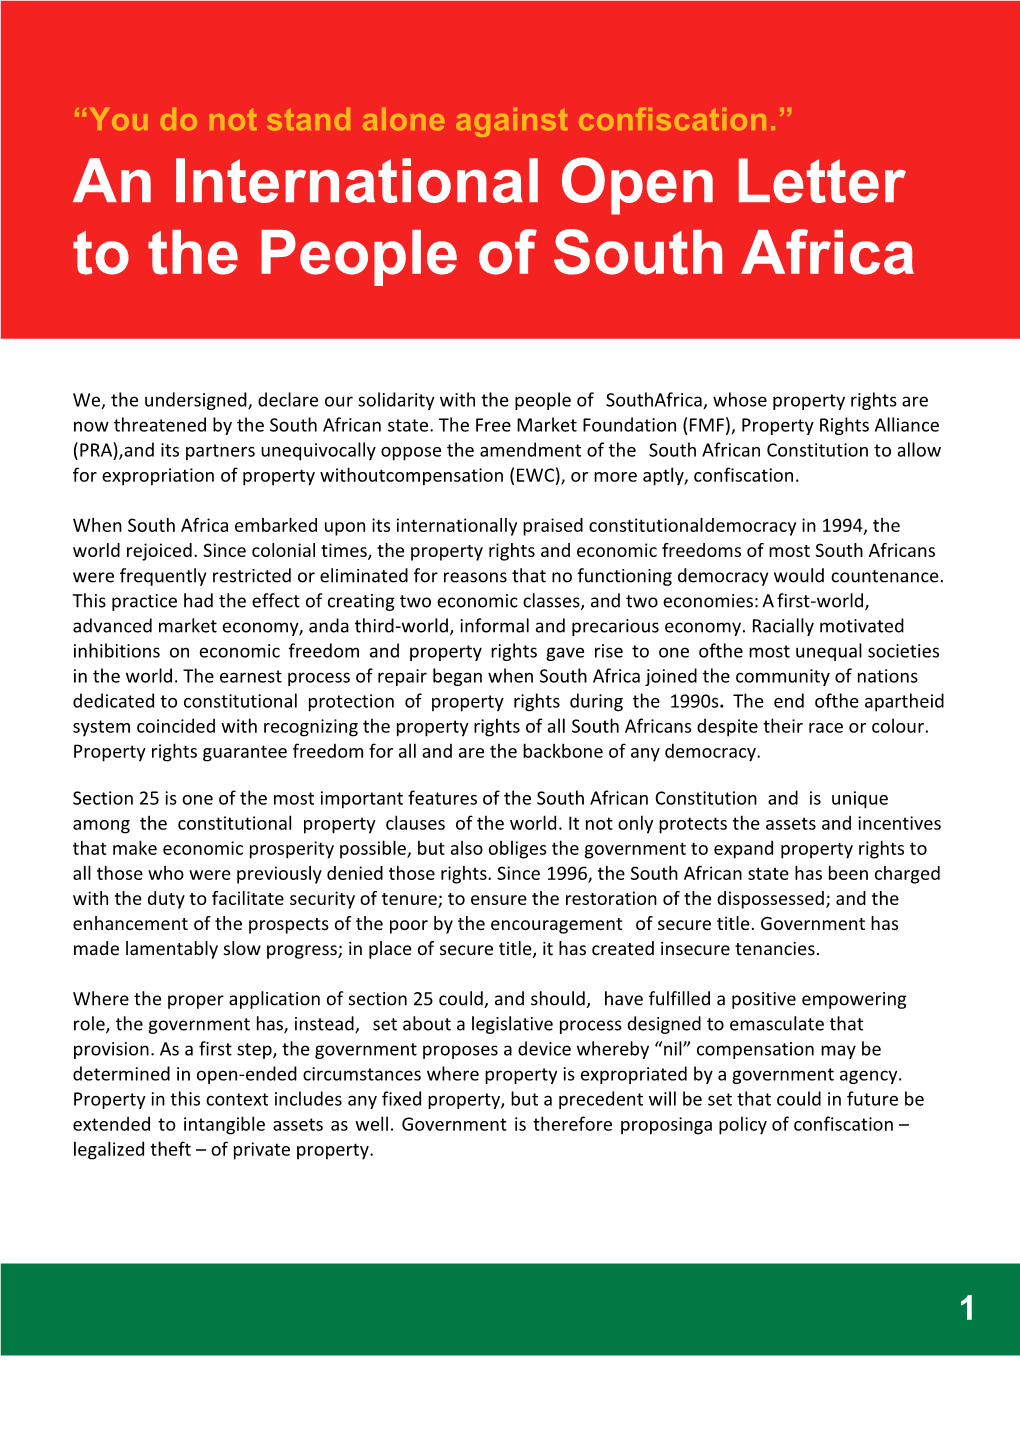 South Africa Coalition Letter